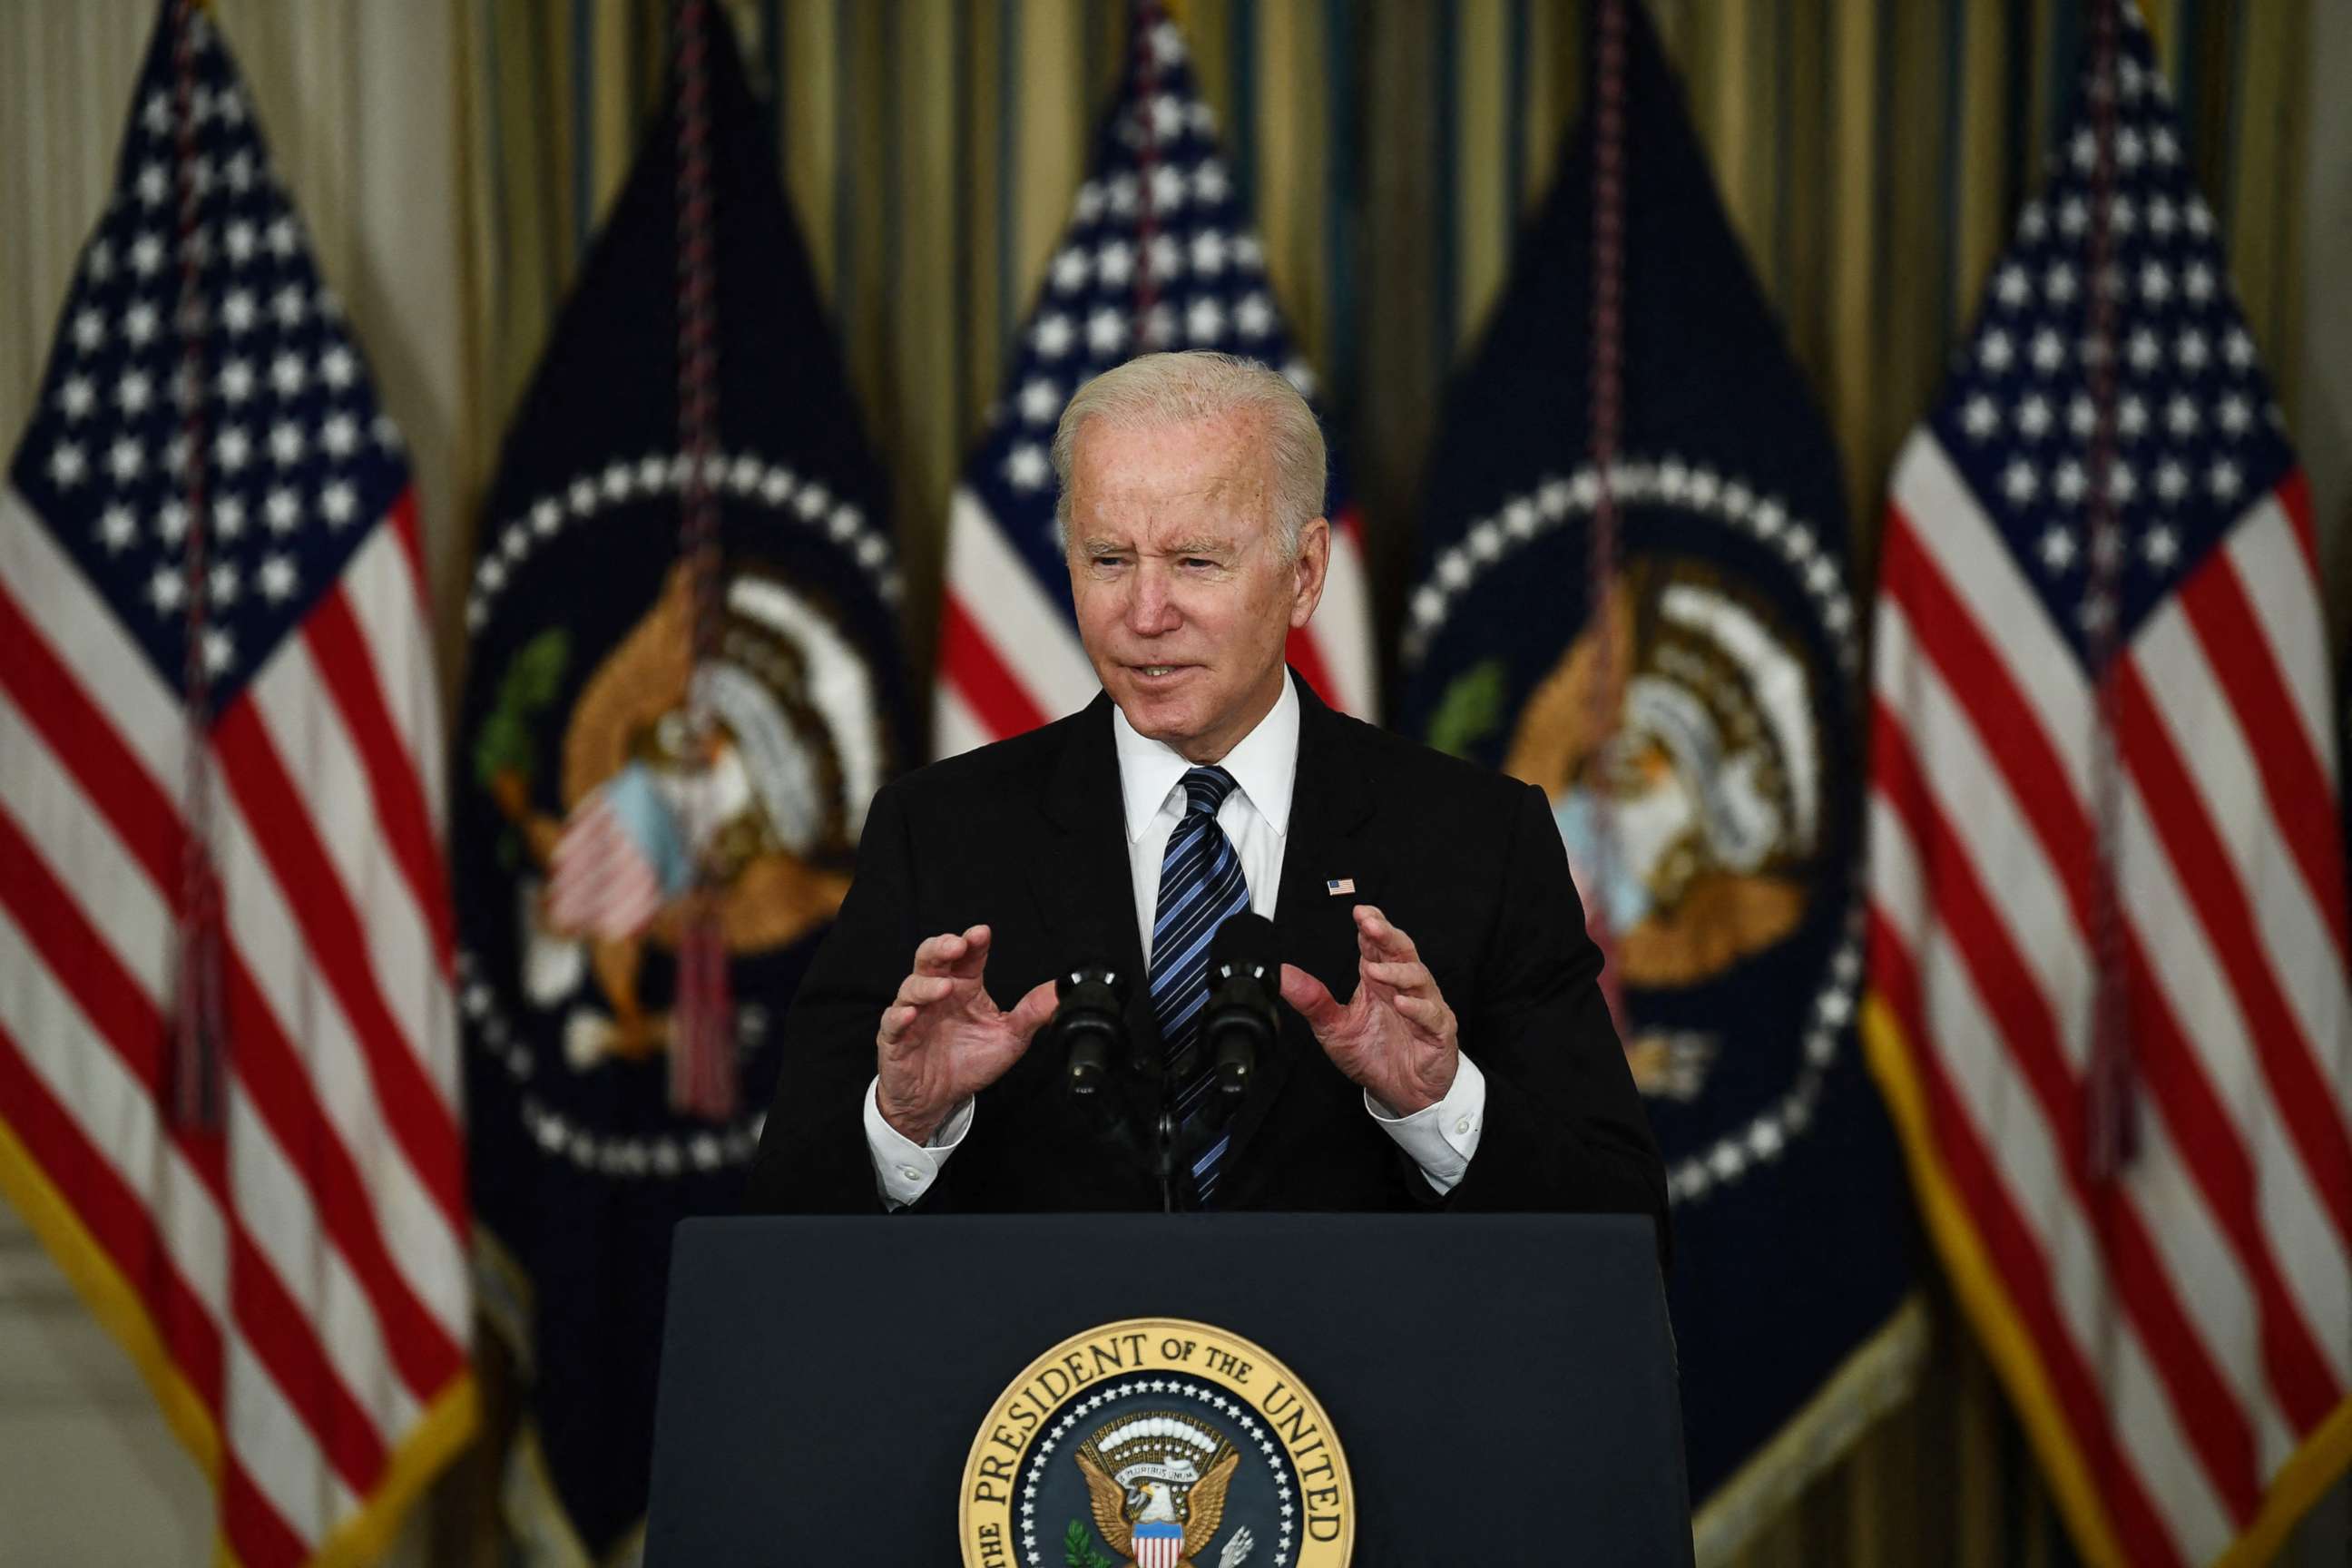 PHOTO: President Joe Biden delivers remarks on the October jobs report from the State Dining Room of the White House in Washington, D.C on Nov. 5, 2021.